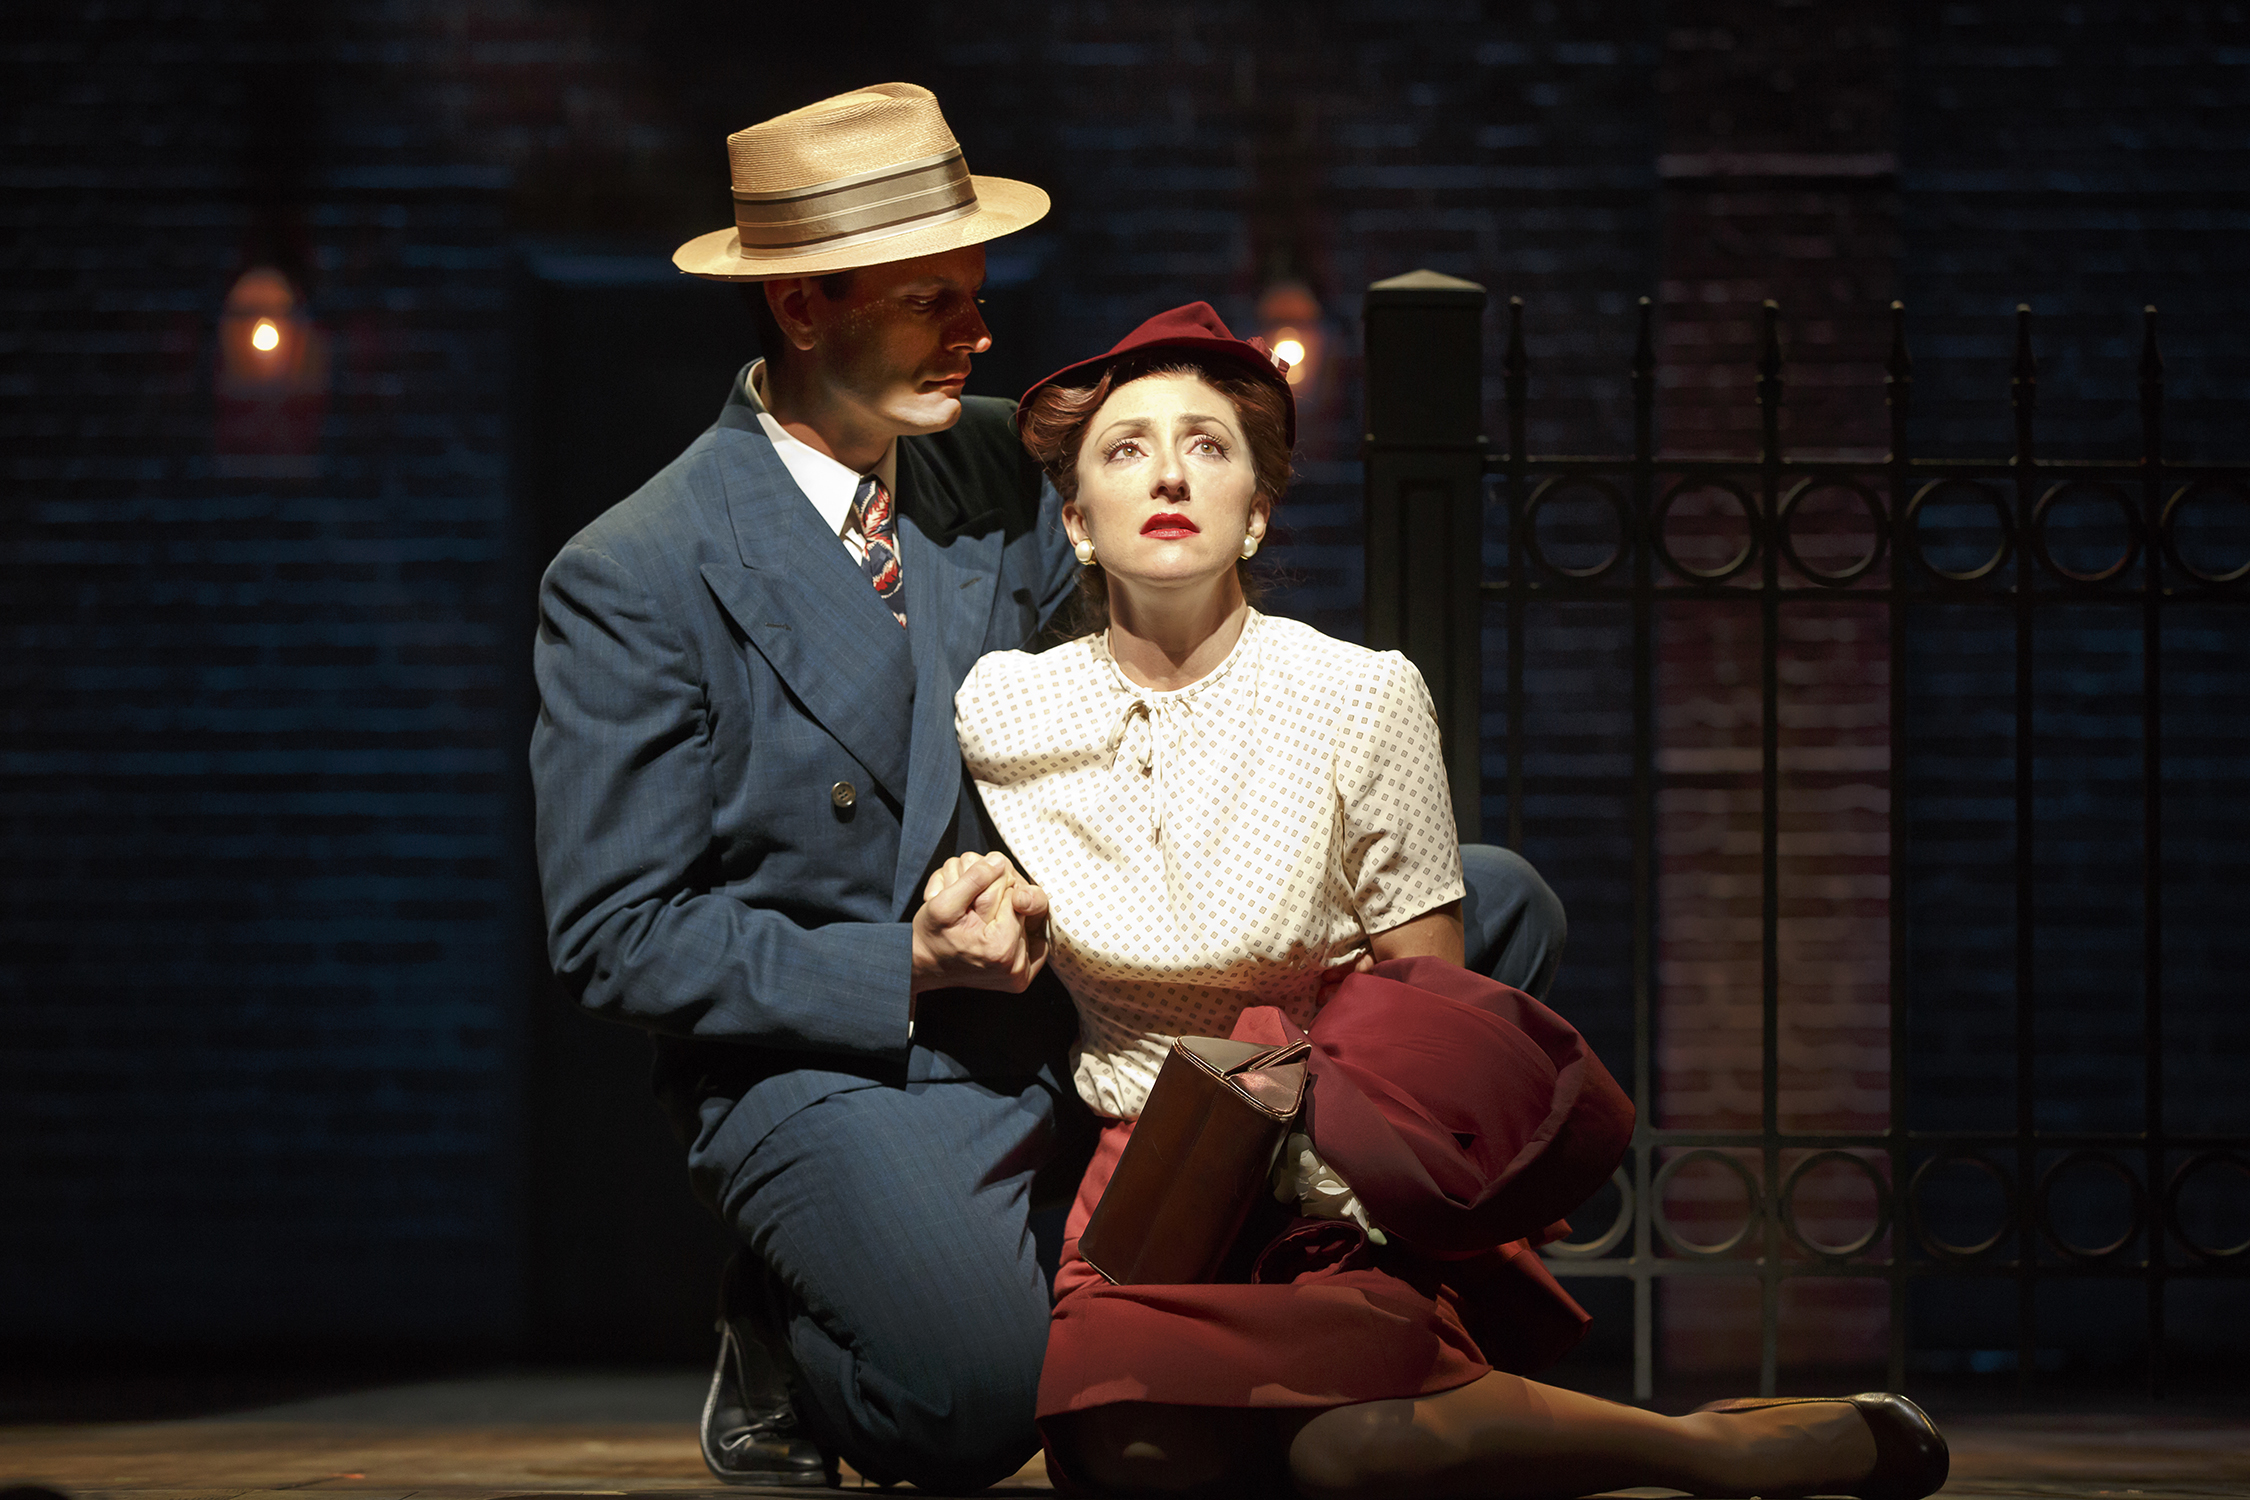 Wayne Alan Wilcox as Jimmy Ray Dobbs and Carmen Cusack as Alice Murphy in the world premiere of Bright Star, a new American musical with music by Steve Martin and Edie Brickell, lyrics by Brickell, book by Martin, based on an original story by Martin and Brickell, and directed by Tony Award winner Walter Bobbie, 2014. Photo by Joan Marcus.